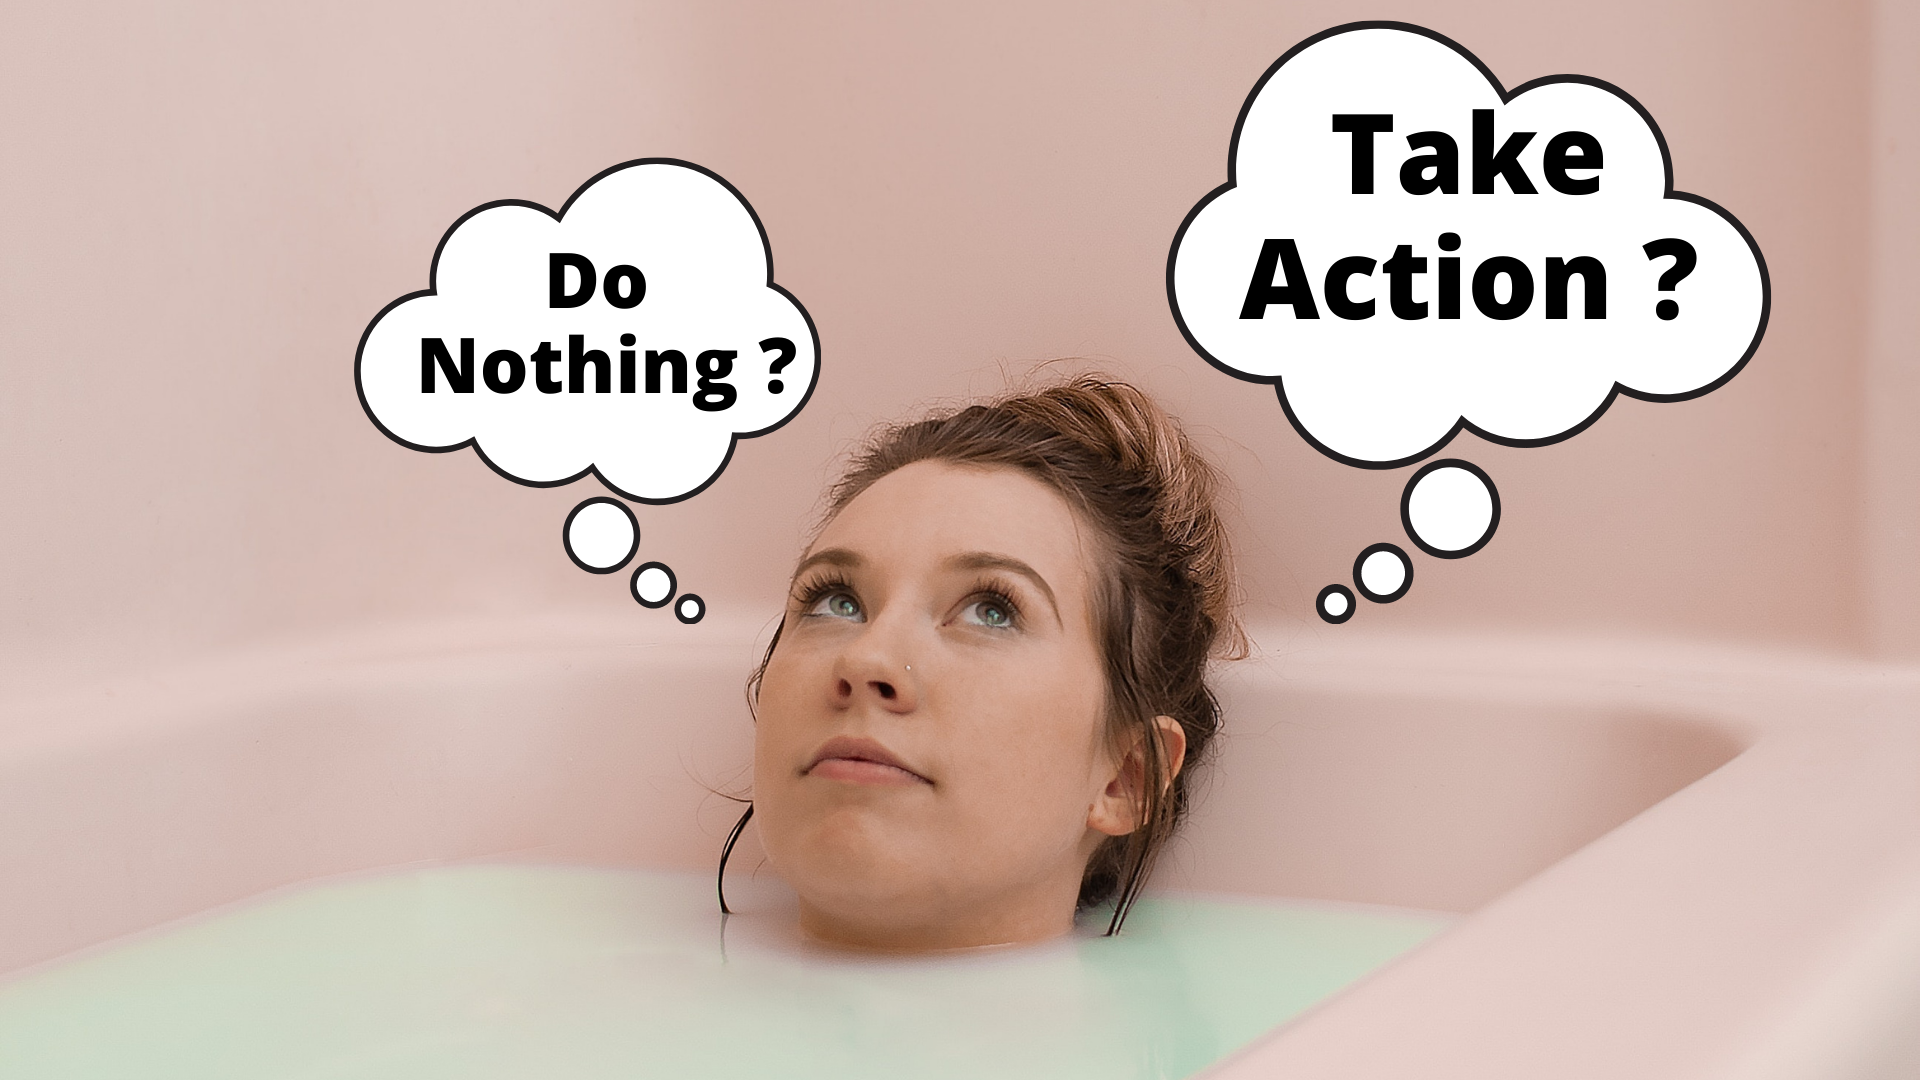 decision-making, image of a woman in a bath making a decision